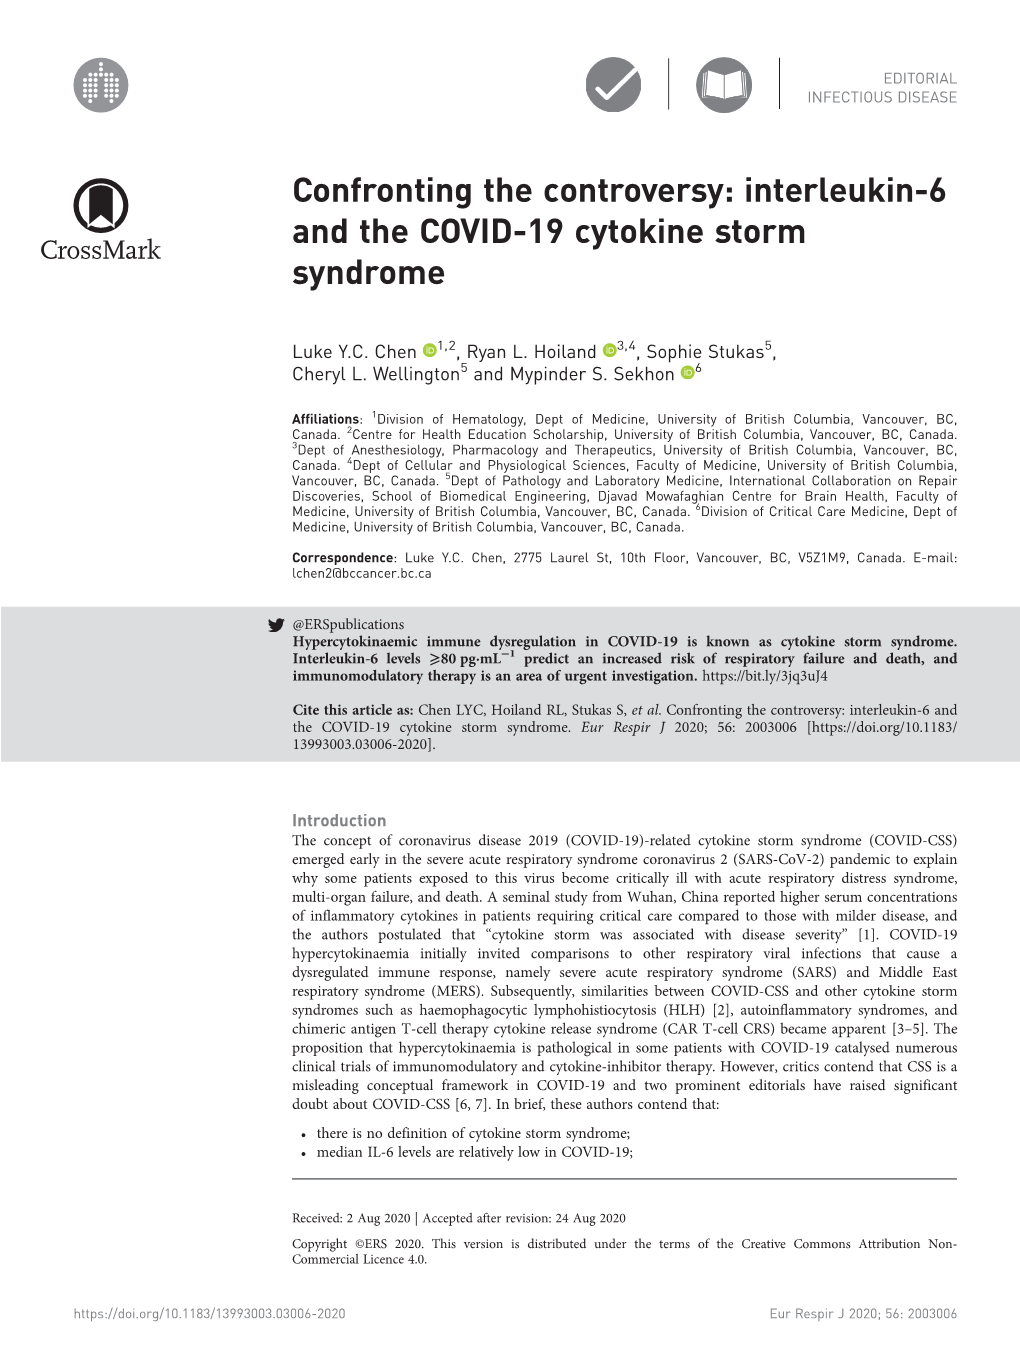 Interleukin-6 and the COVID-19 Cytokine Storm Syndrome